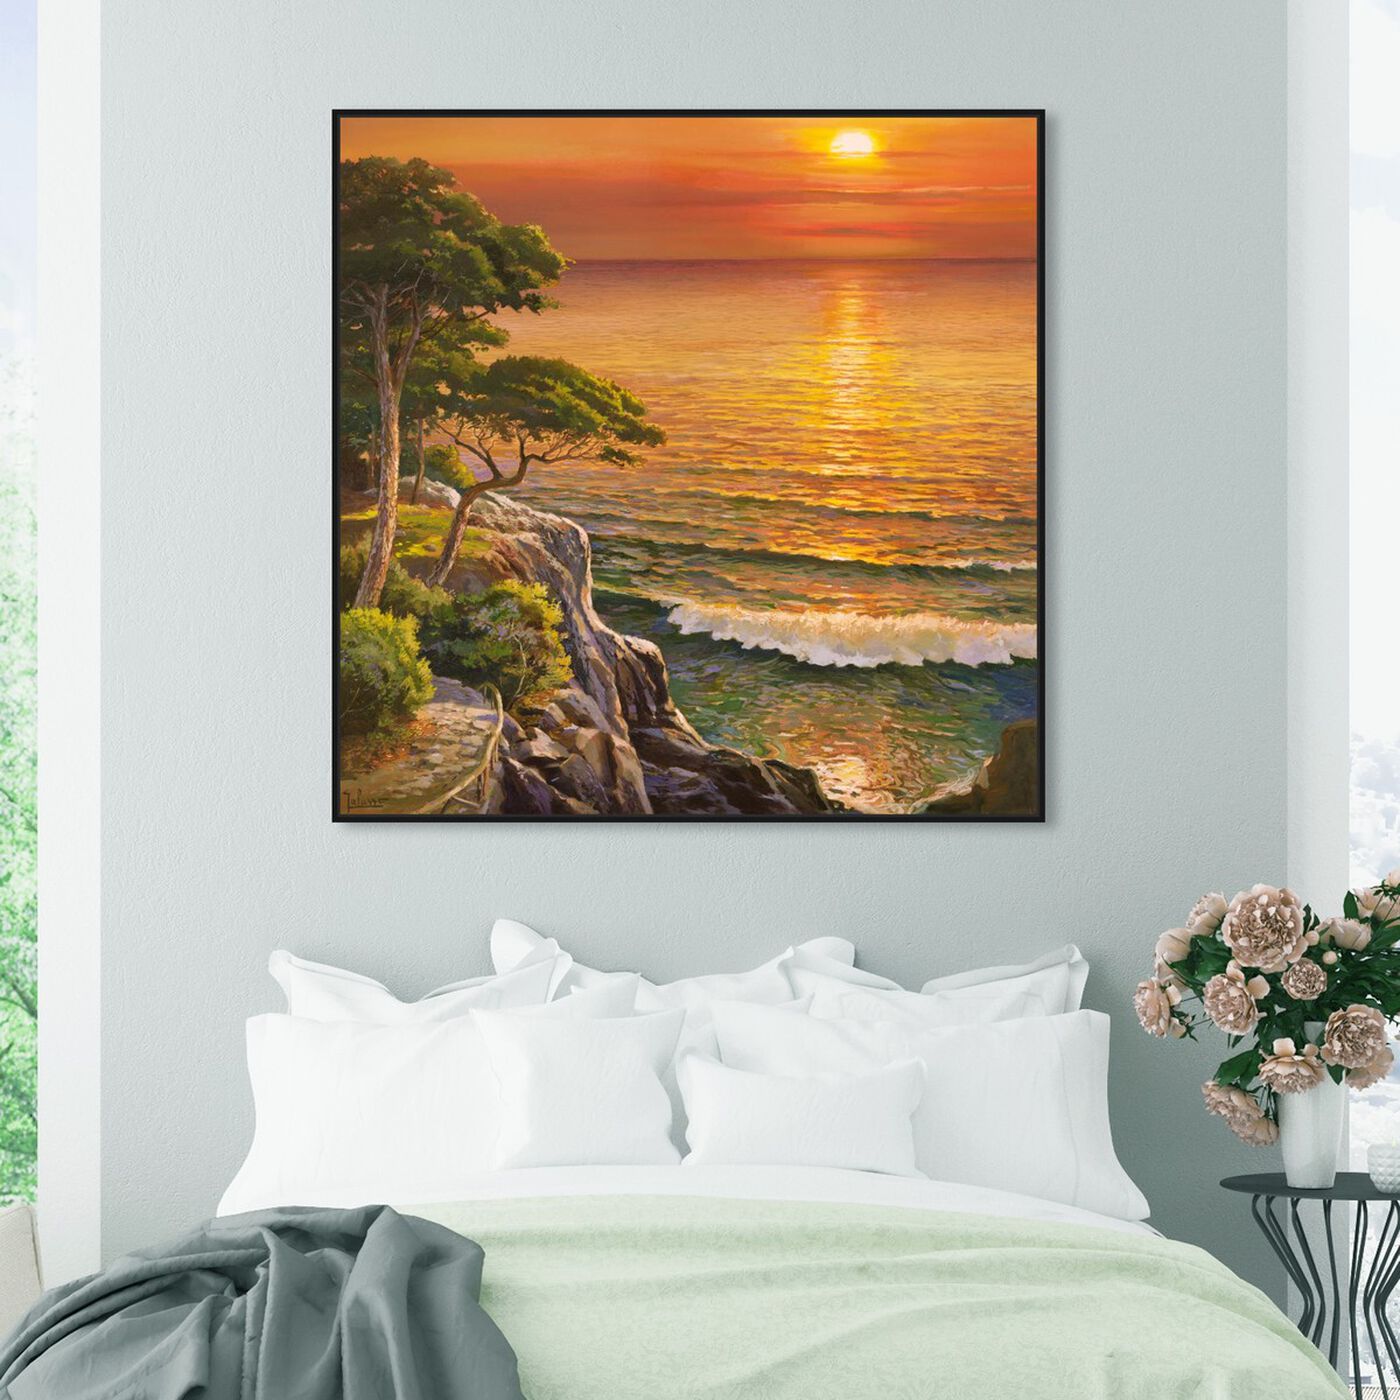 Hanging view of Sai - Sunset Visage 1AD2552 featuring nature and landscape and sunrise and sunsets art.